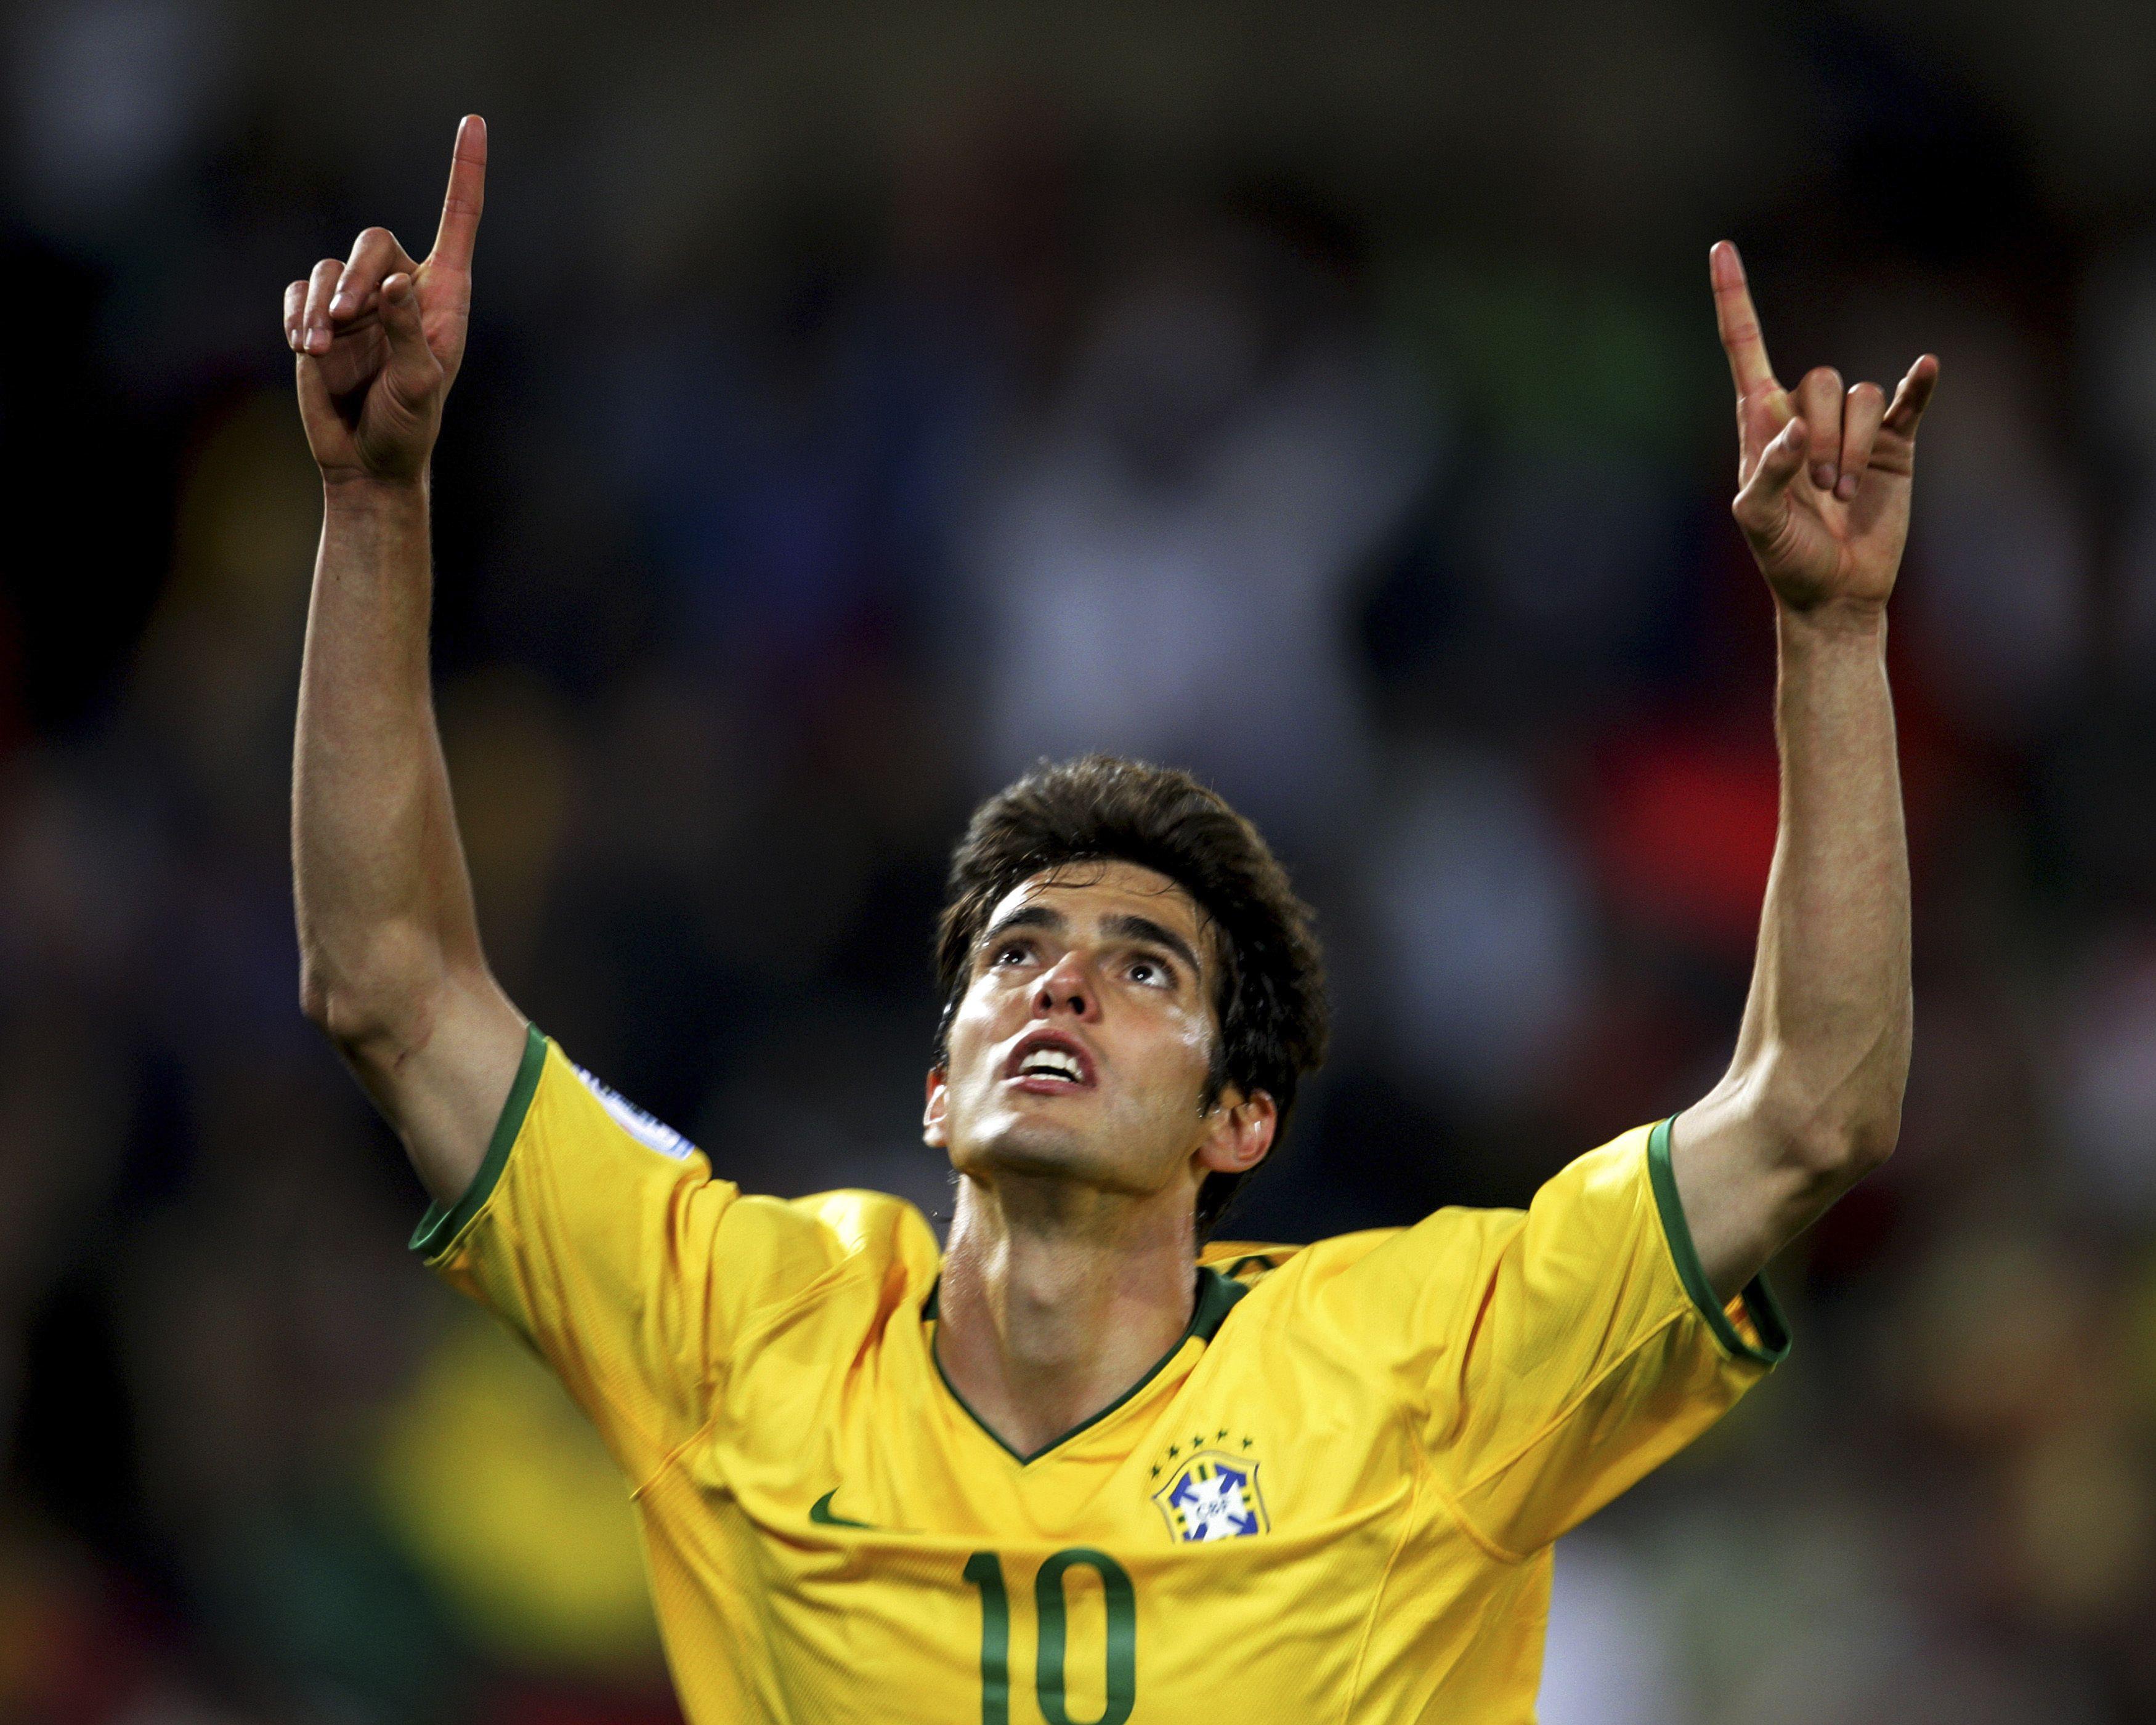 Ricardo Kaka HD Wallpapers Images Pictures Photos Download